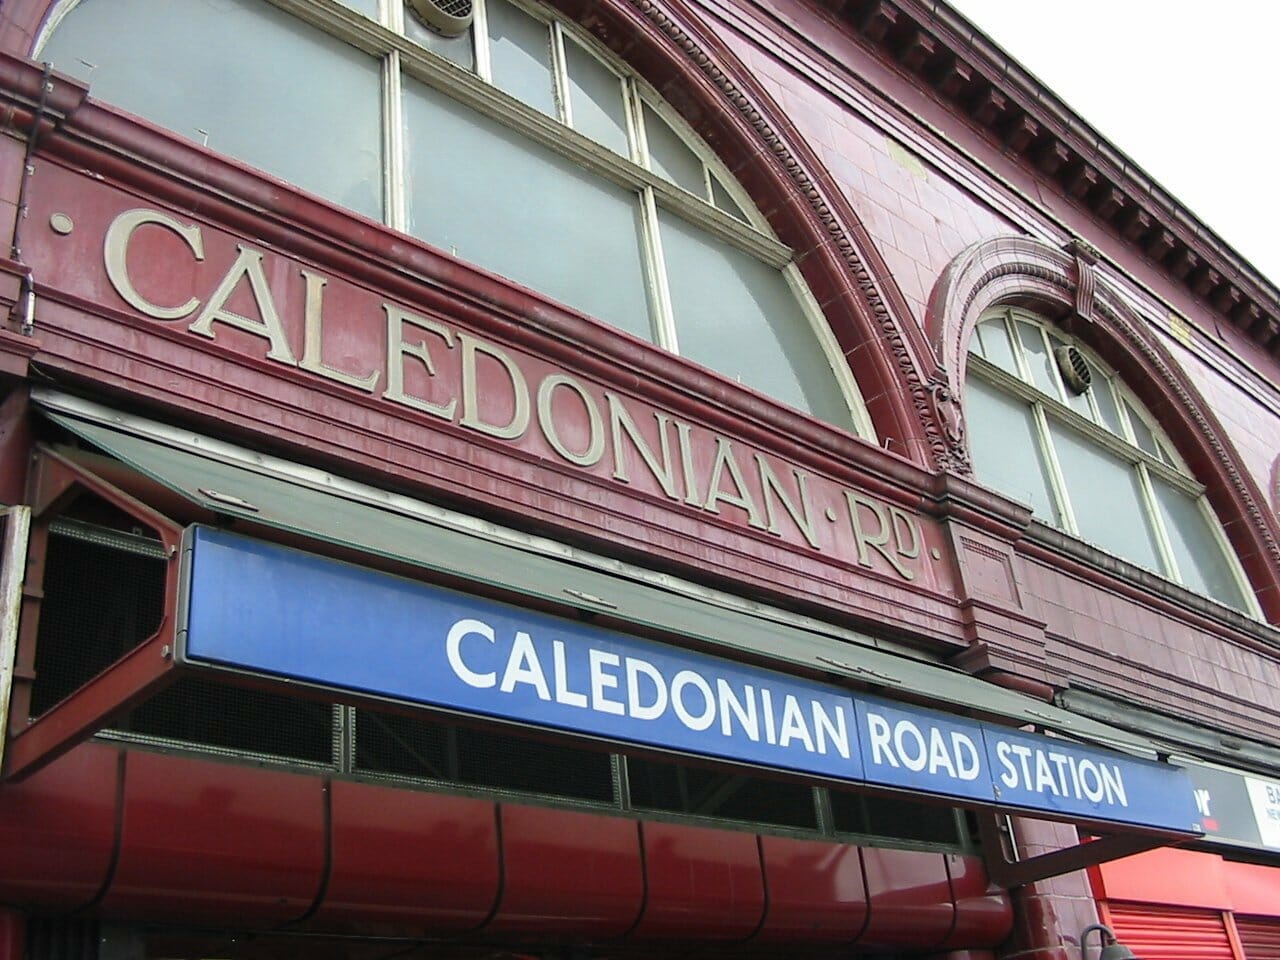 shows Caledonian Road tube station